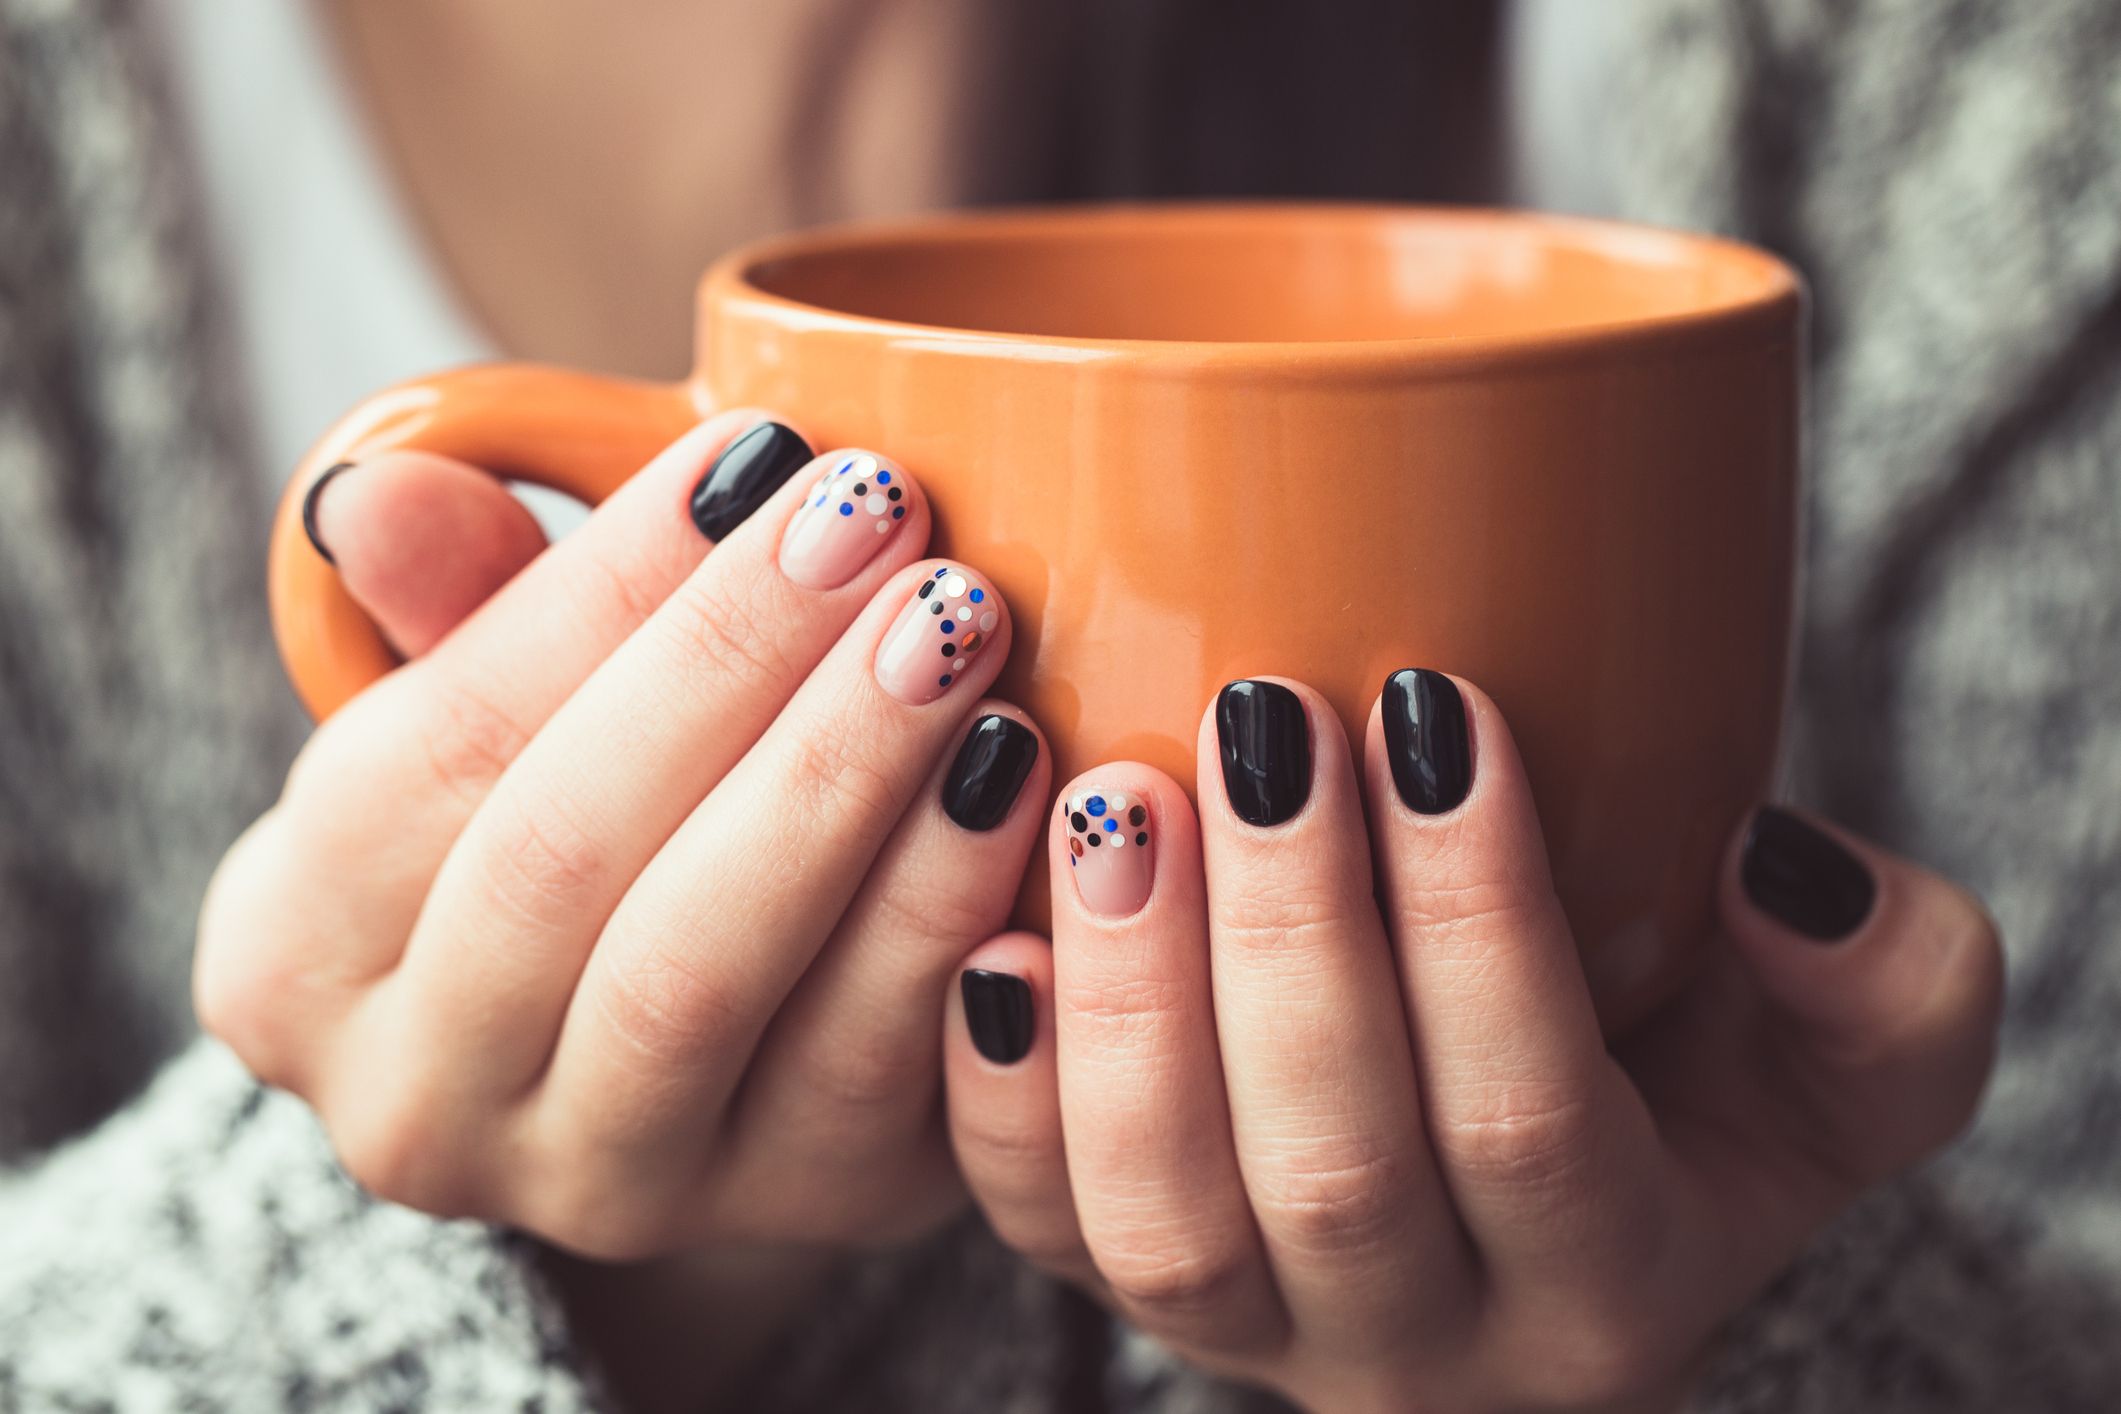 Thanksgiving Nail Art Ideas: 10 Festive Designs for the Holiday - wide 8